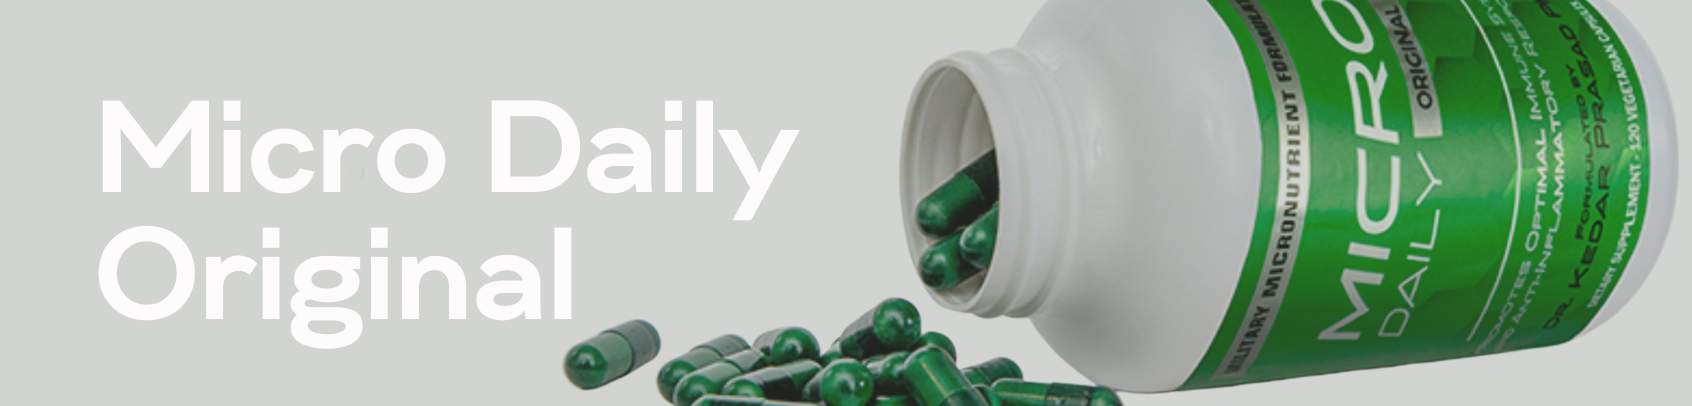 Micro Daily Original: The World’s Most Scientifically Validated Supplement for Your Health